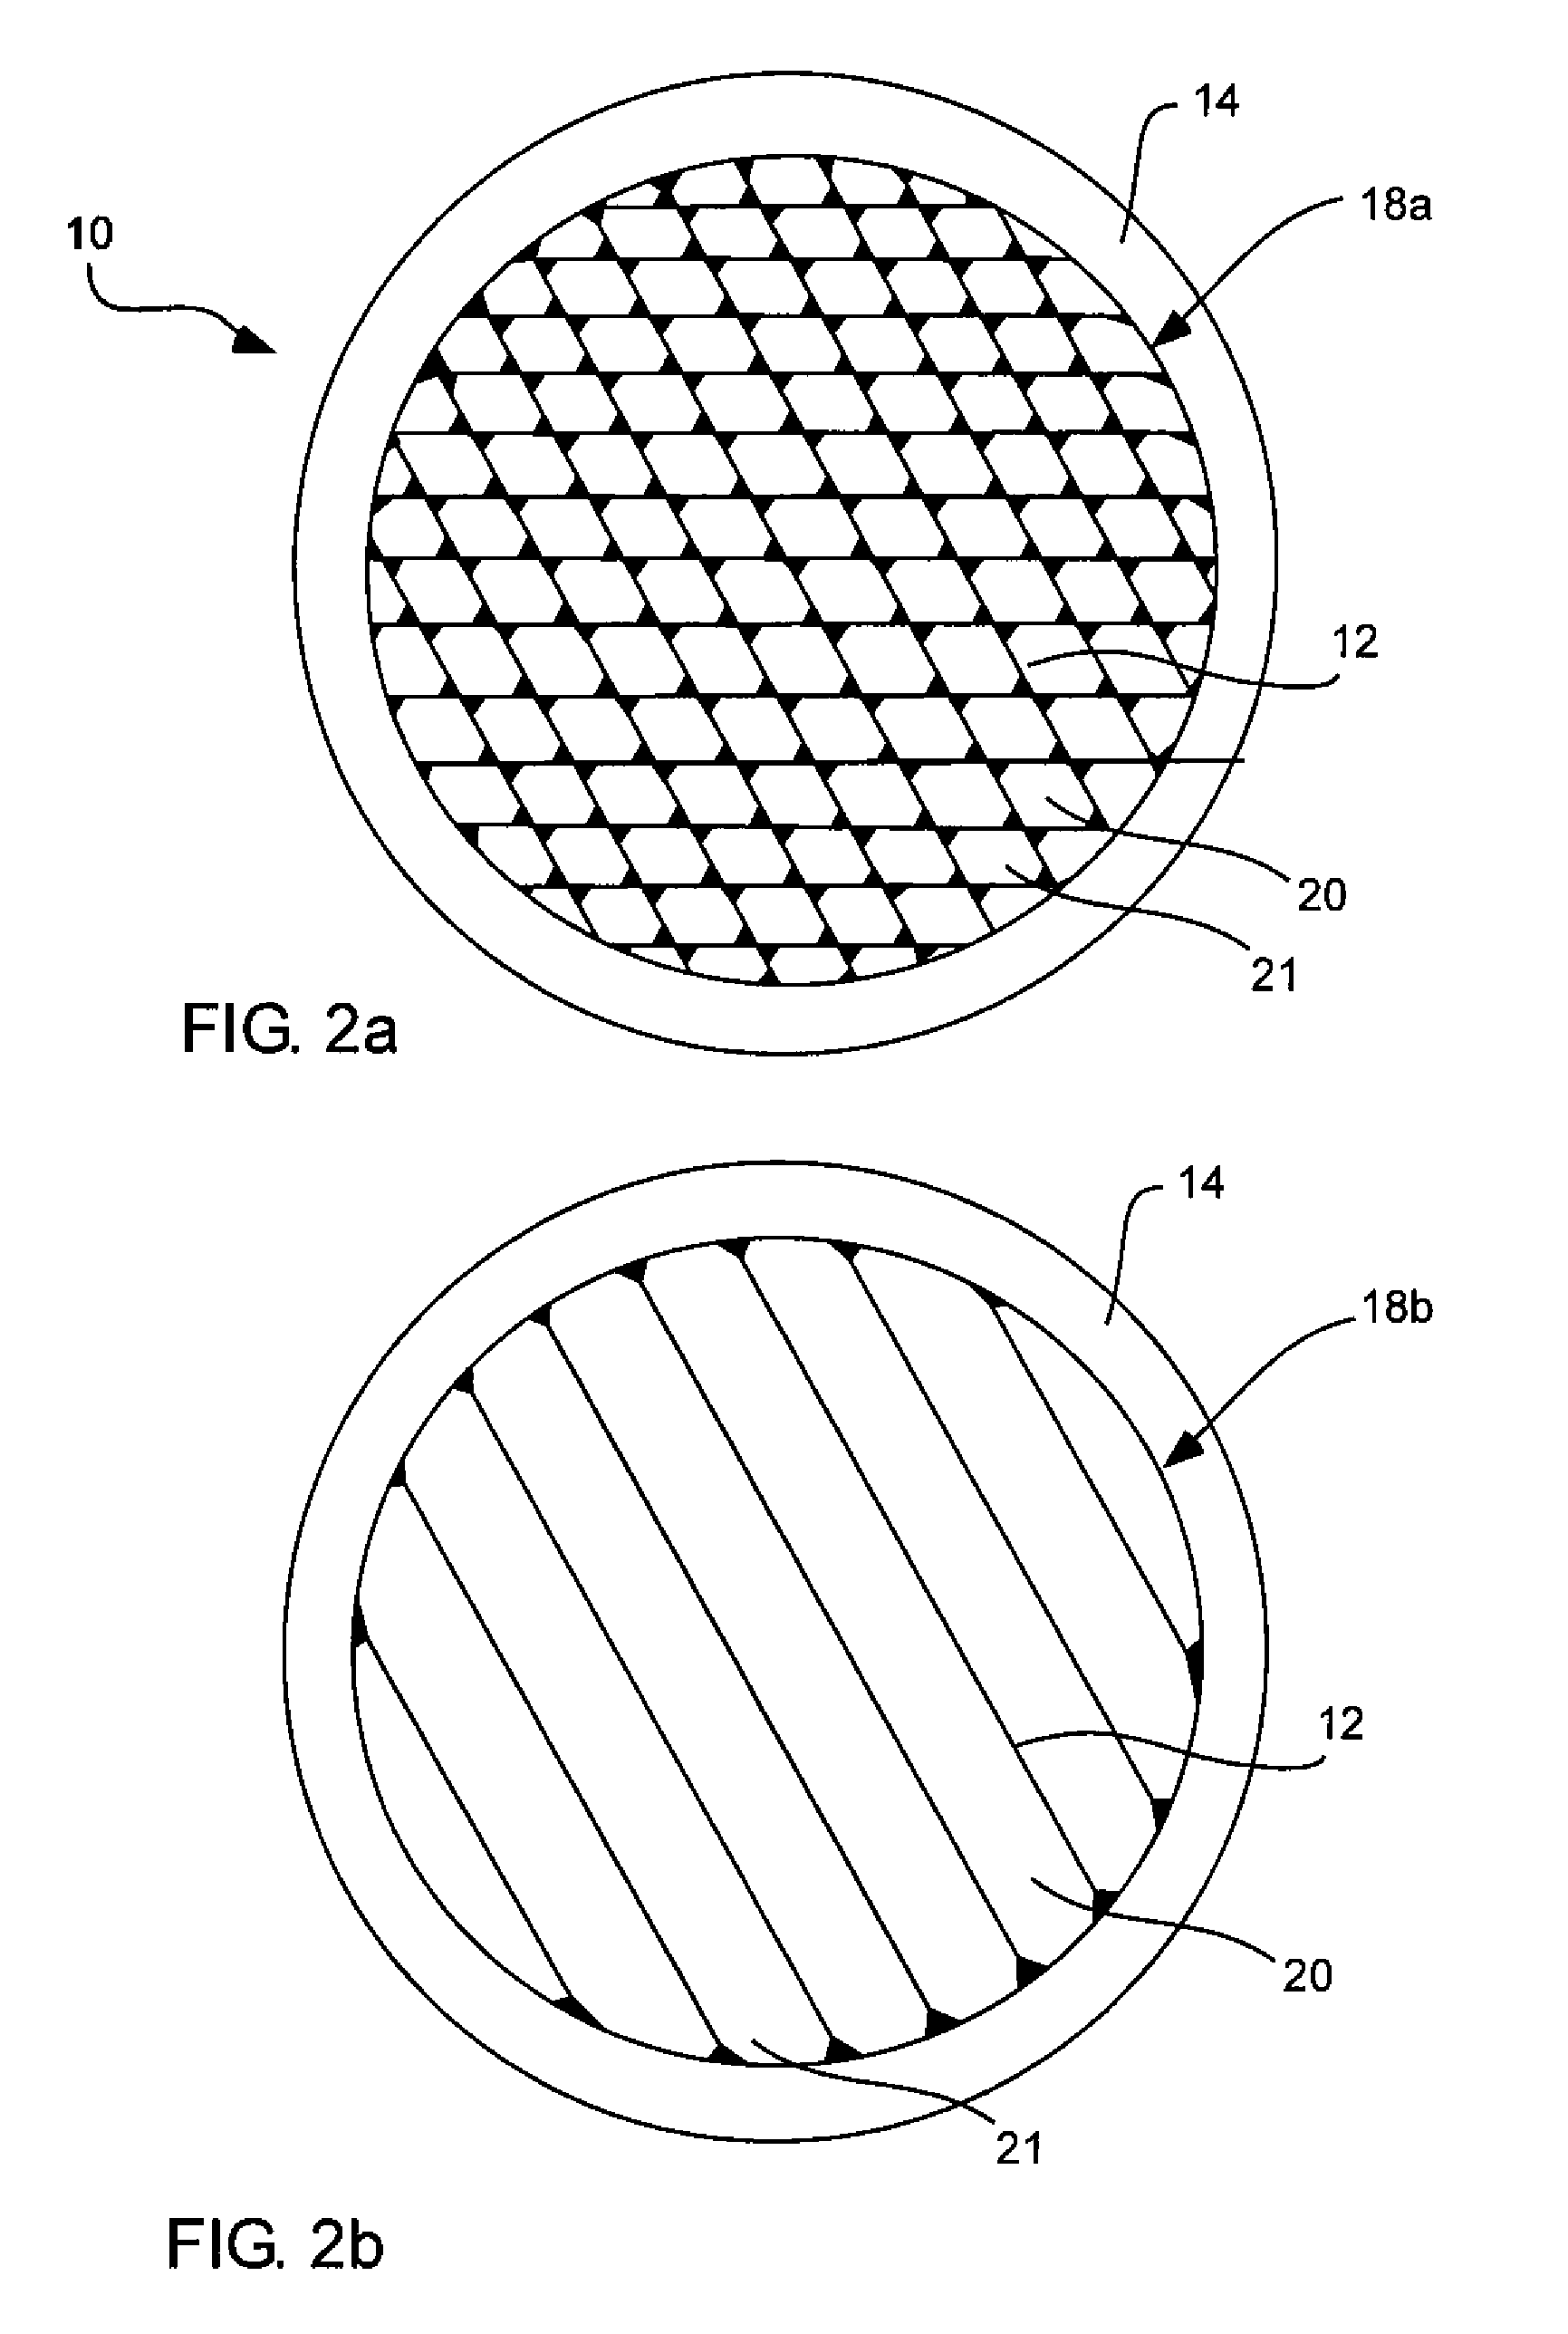 Radiation window with coated silicon support structure